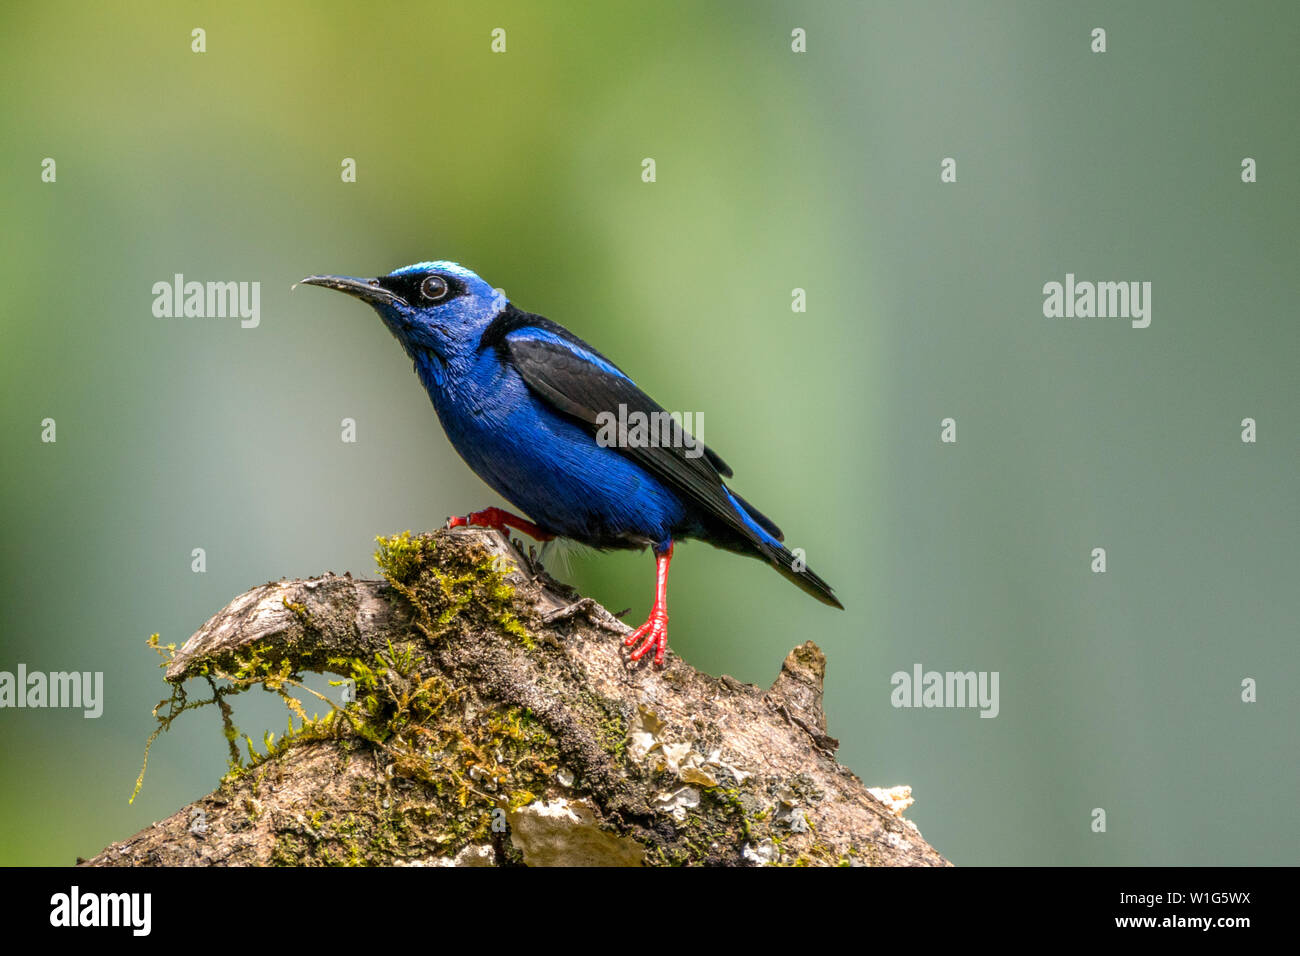 Male red-legged honeycreeper (Cyanerpes cyaneus) perching on a tree branch in Maquenque, Costa Rica Stock Photo